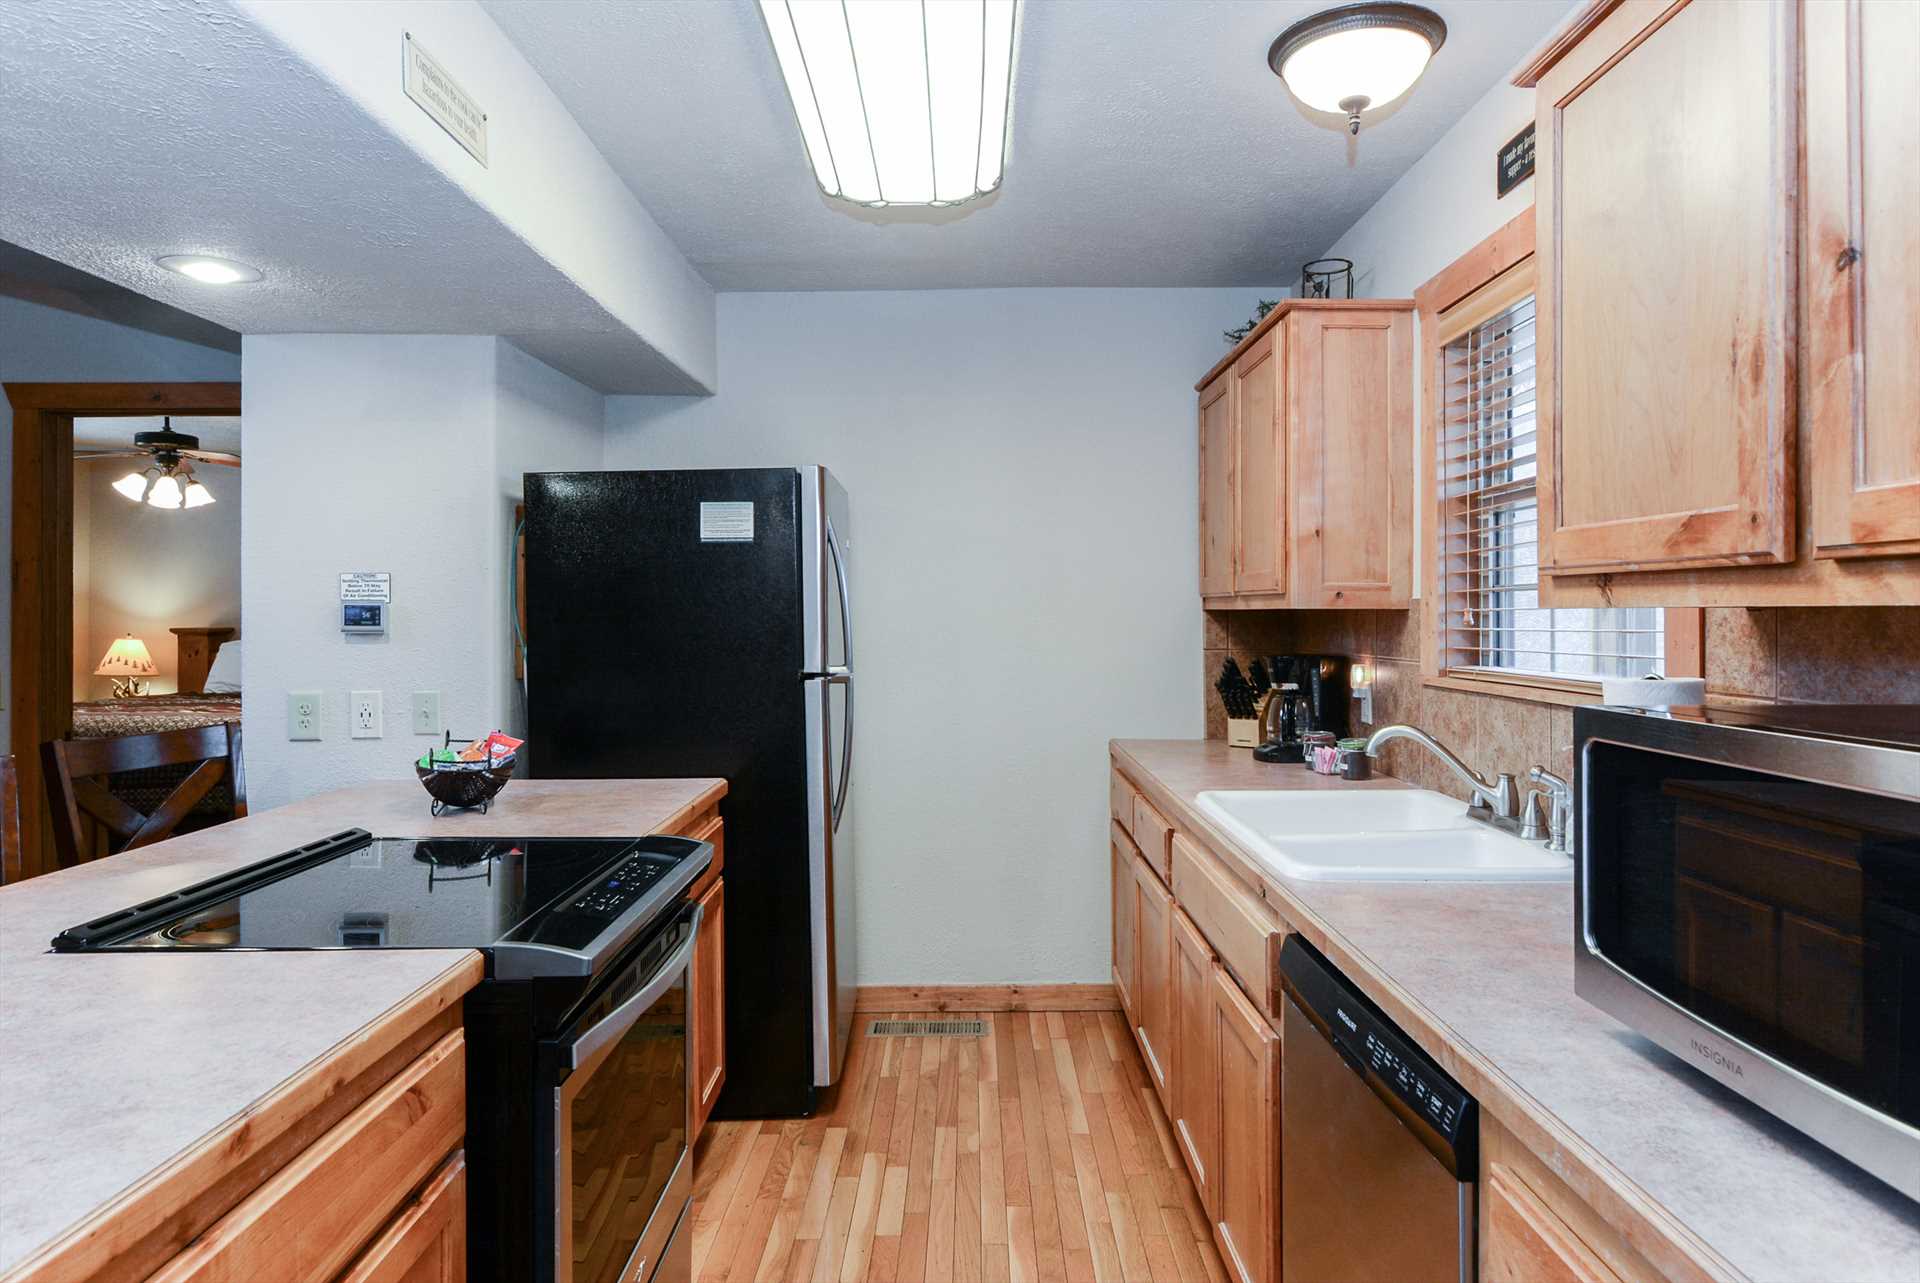 The kitchen boasts updated appliances, Lodge #20.